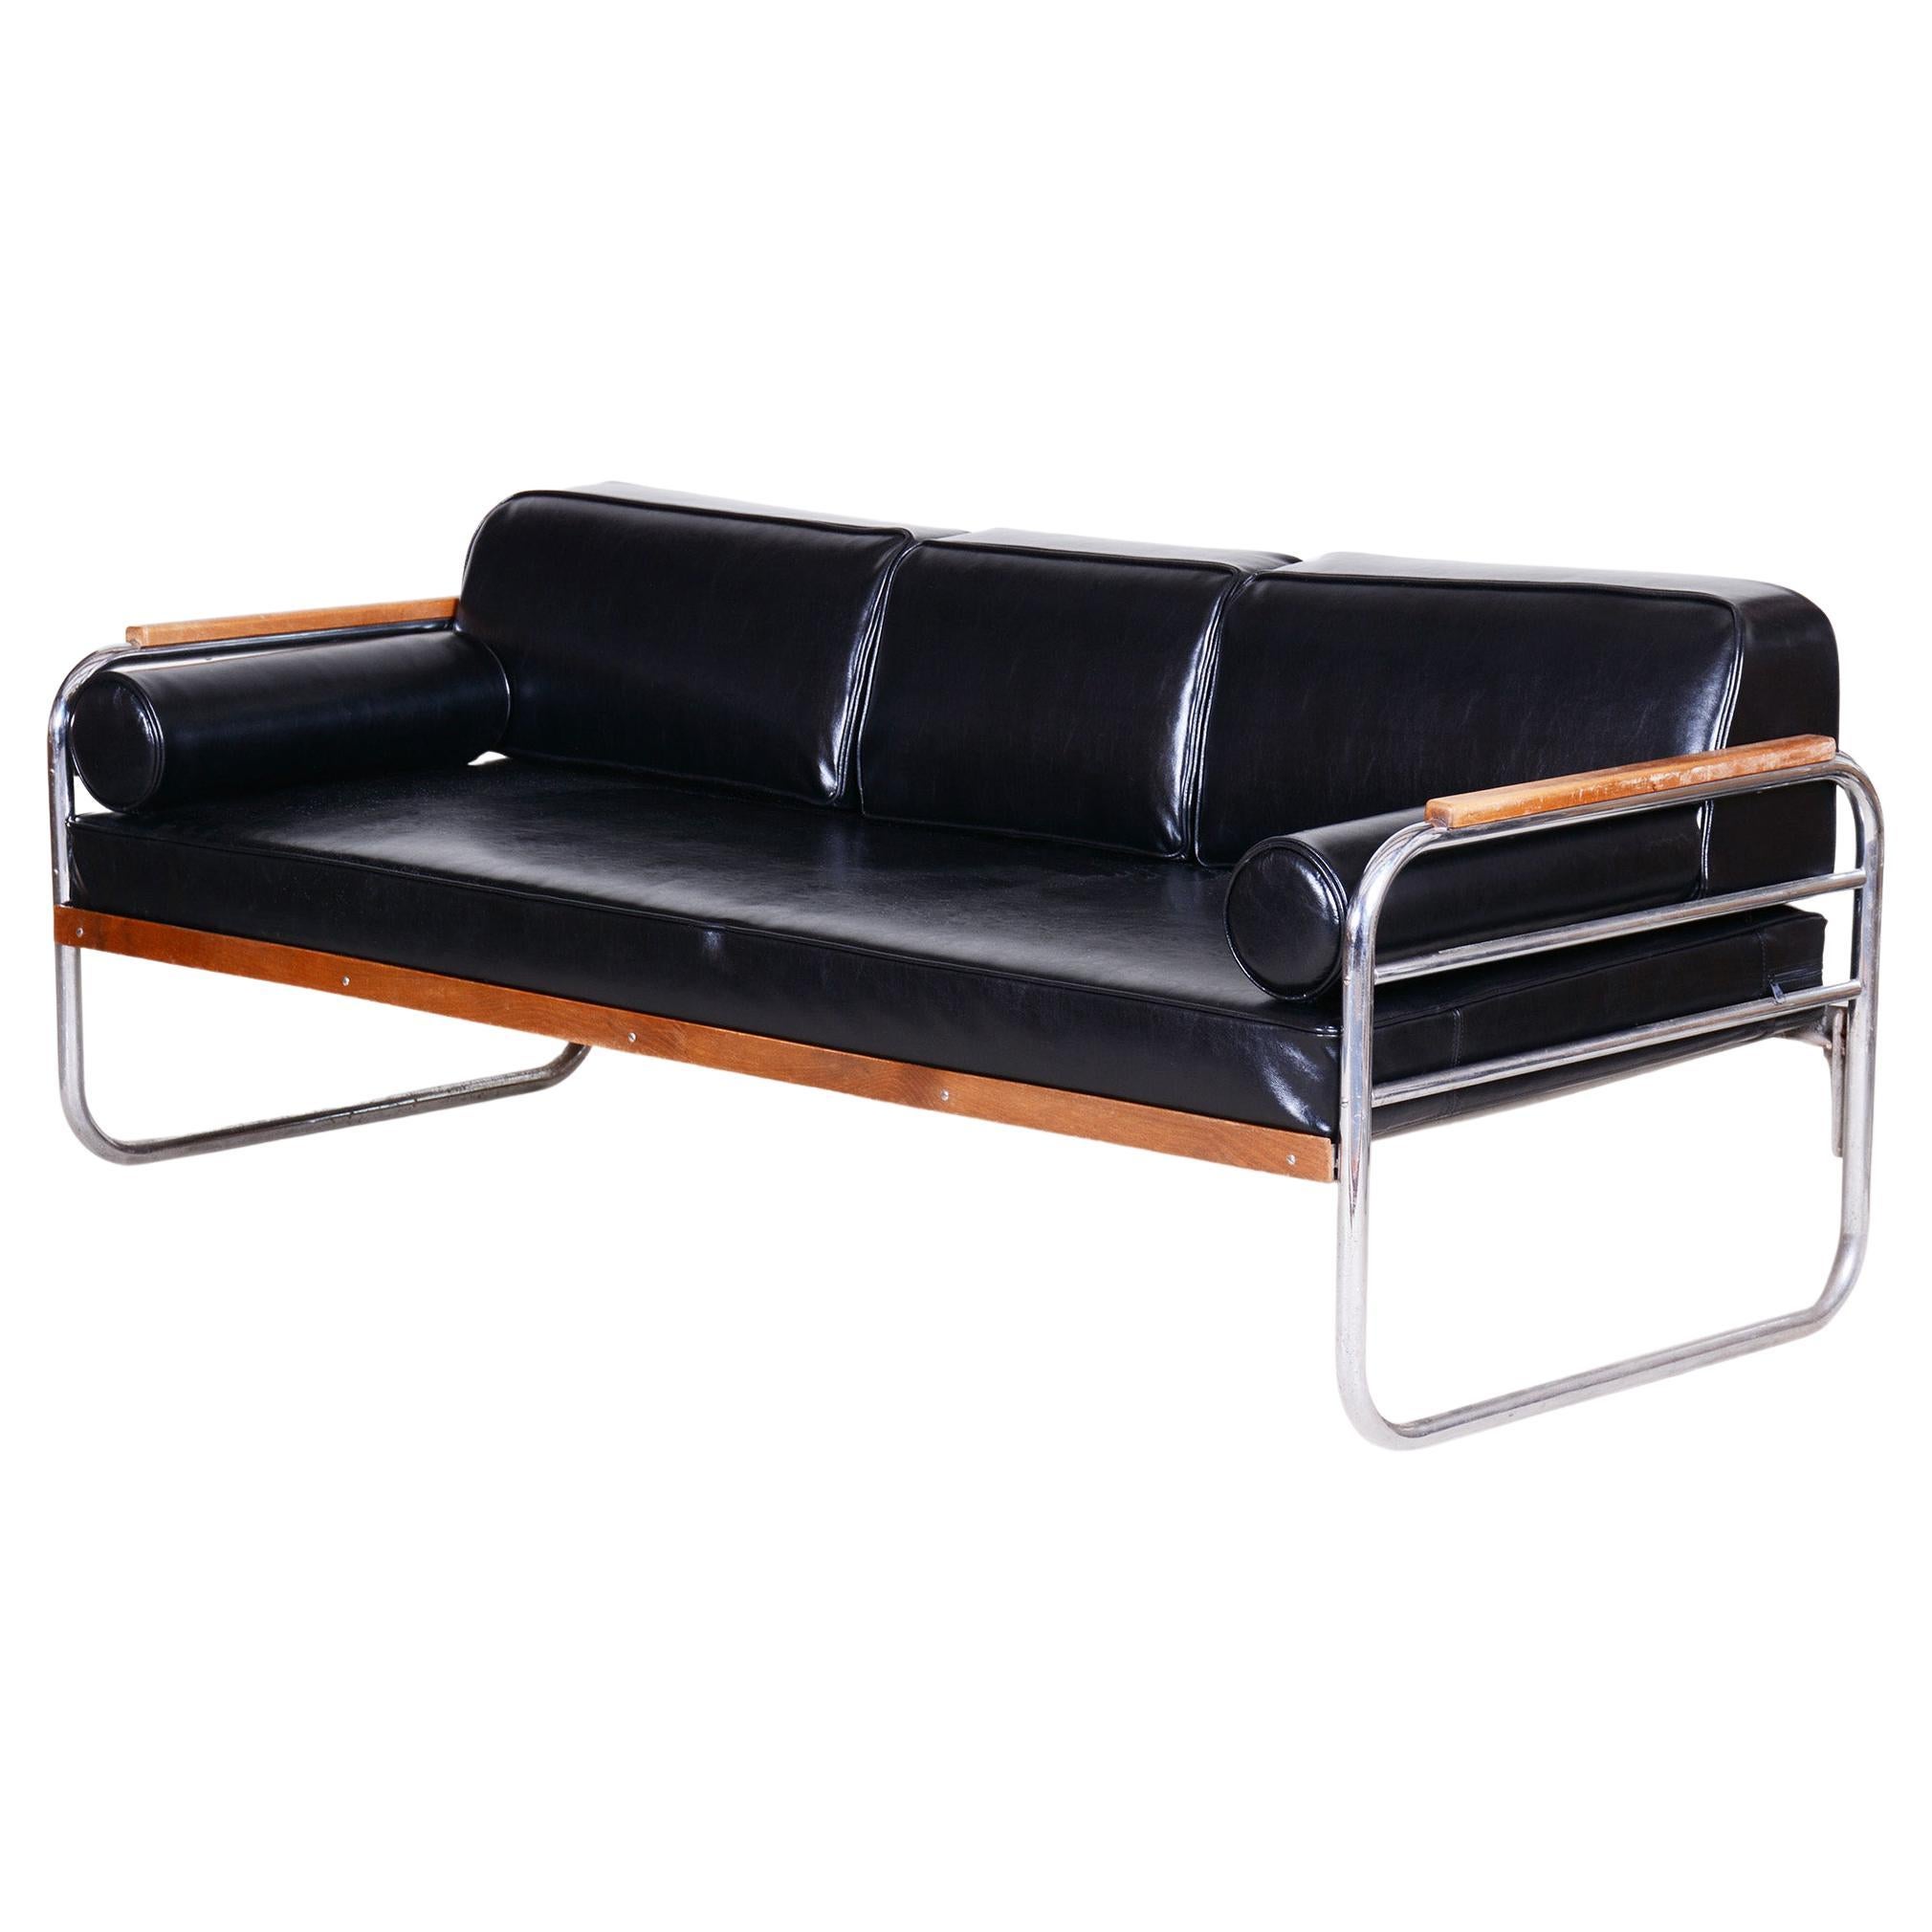 Black Leather Sofa Made by Thonet in 1930s Czechia